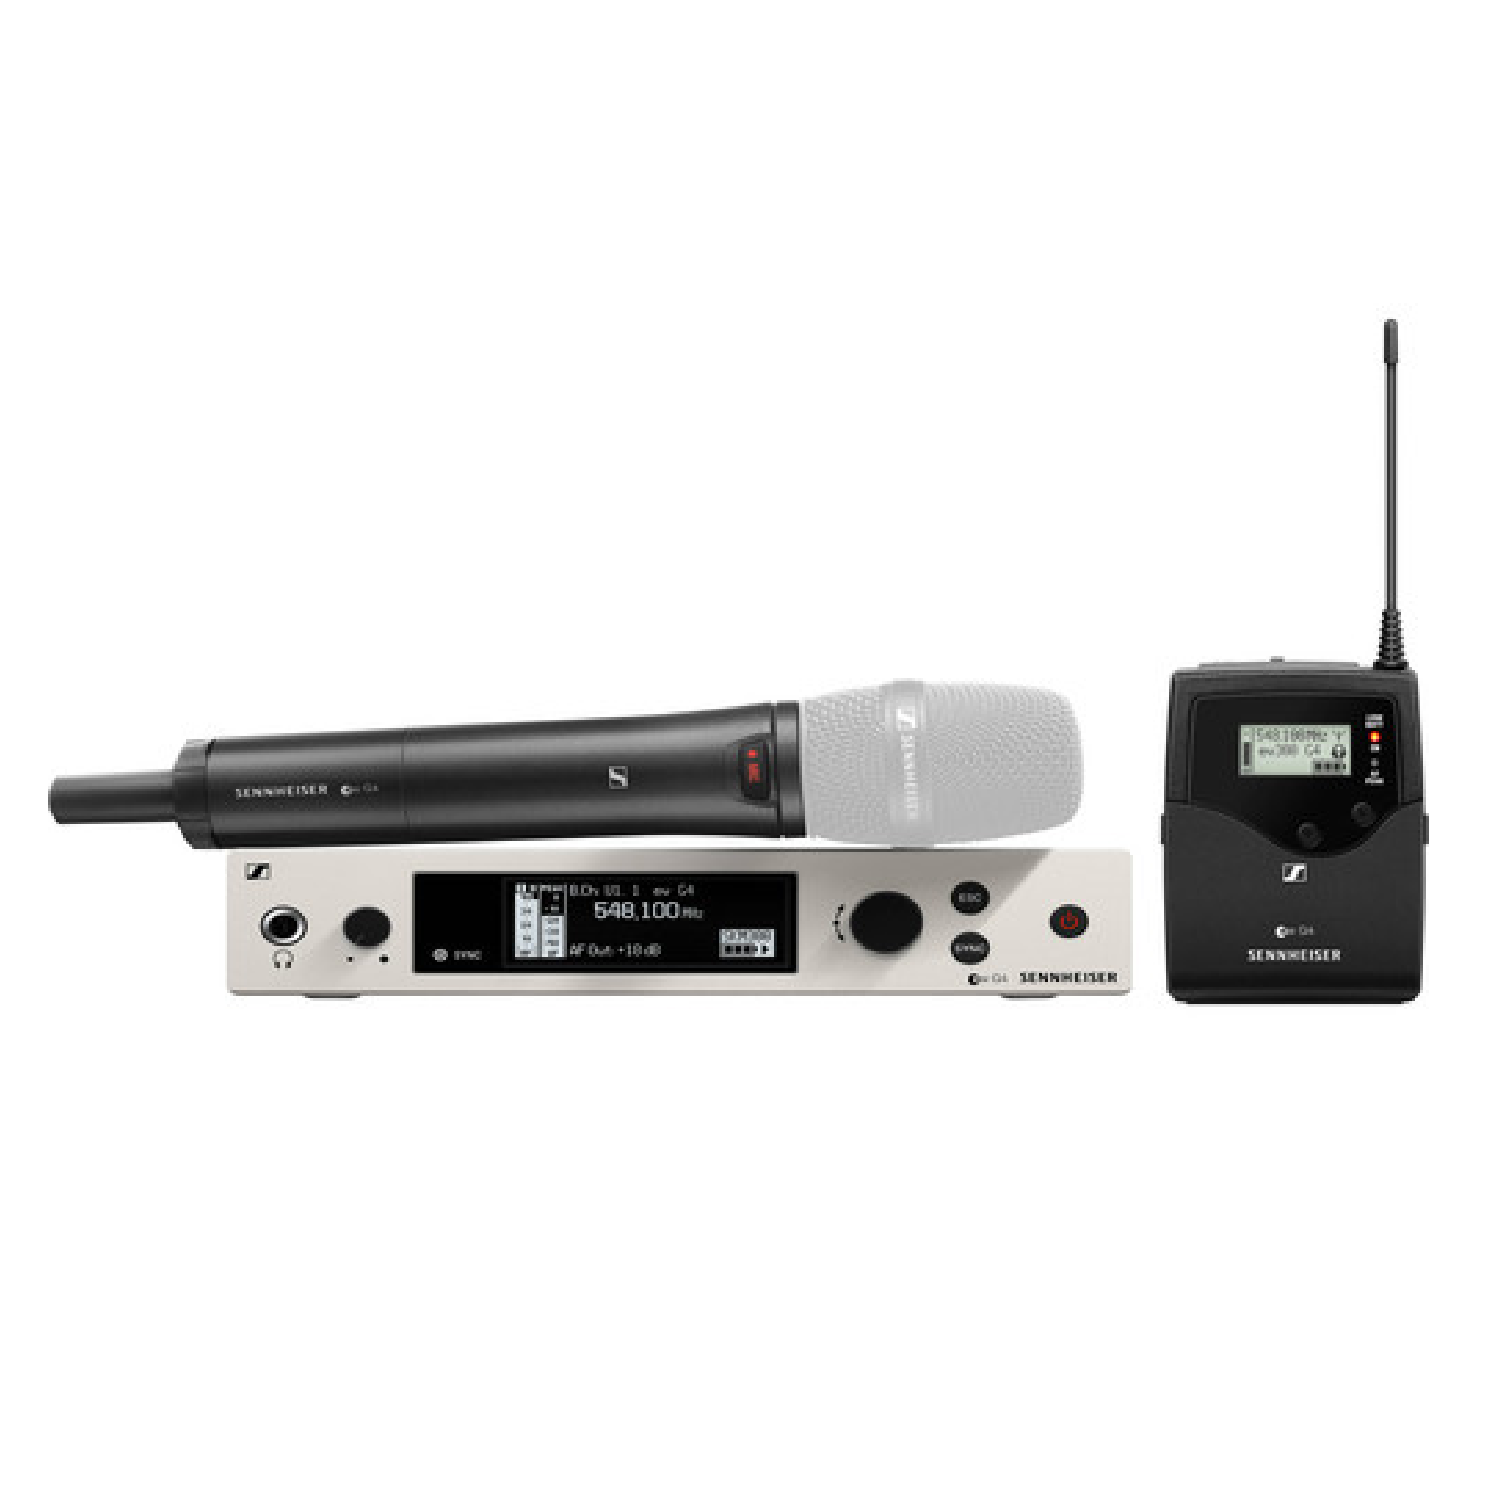 Wireless Microphone System with No Mics - GBw: 660 - 678 MHz   EW 300 G4 Base COMBO GBw sennheiser